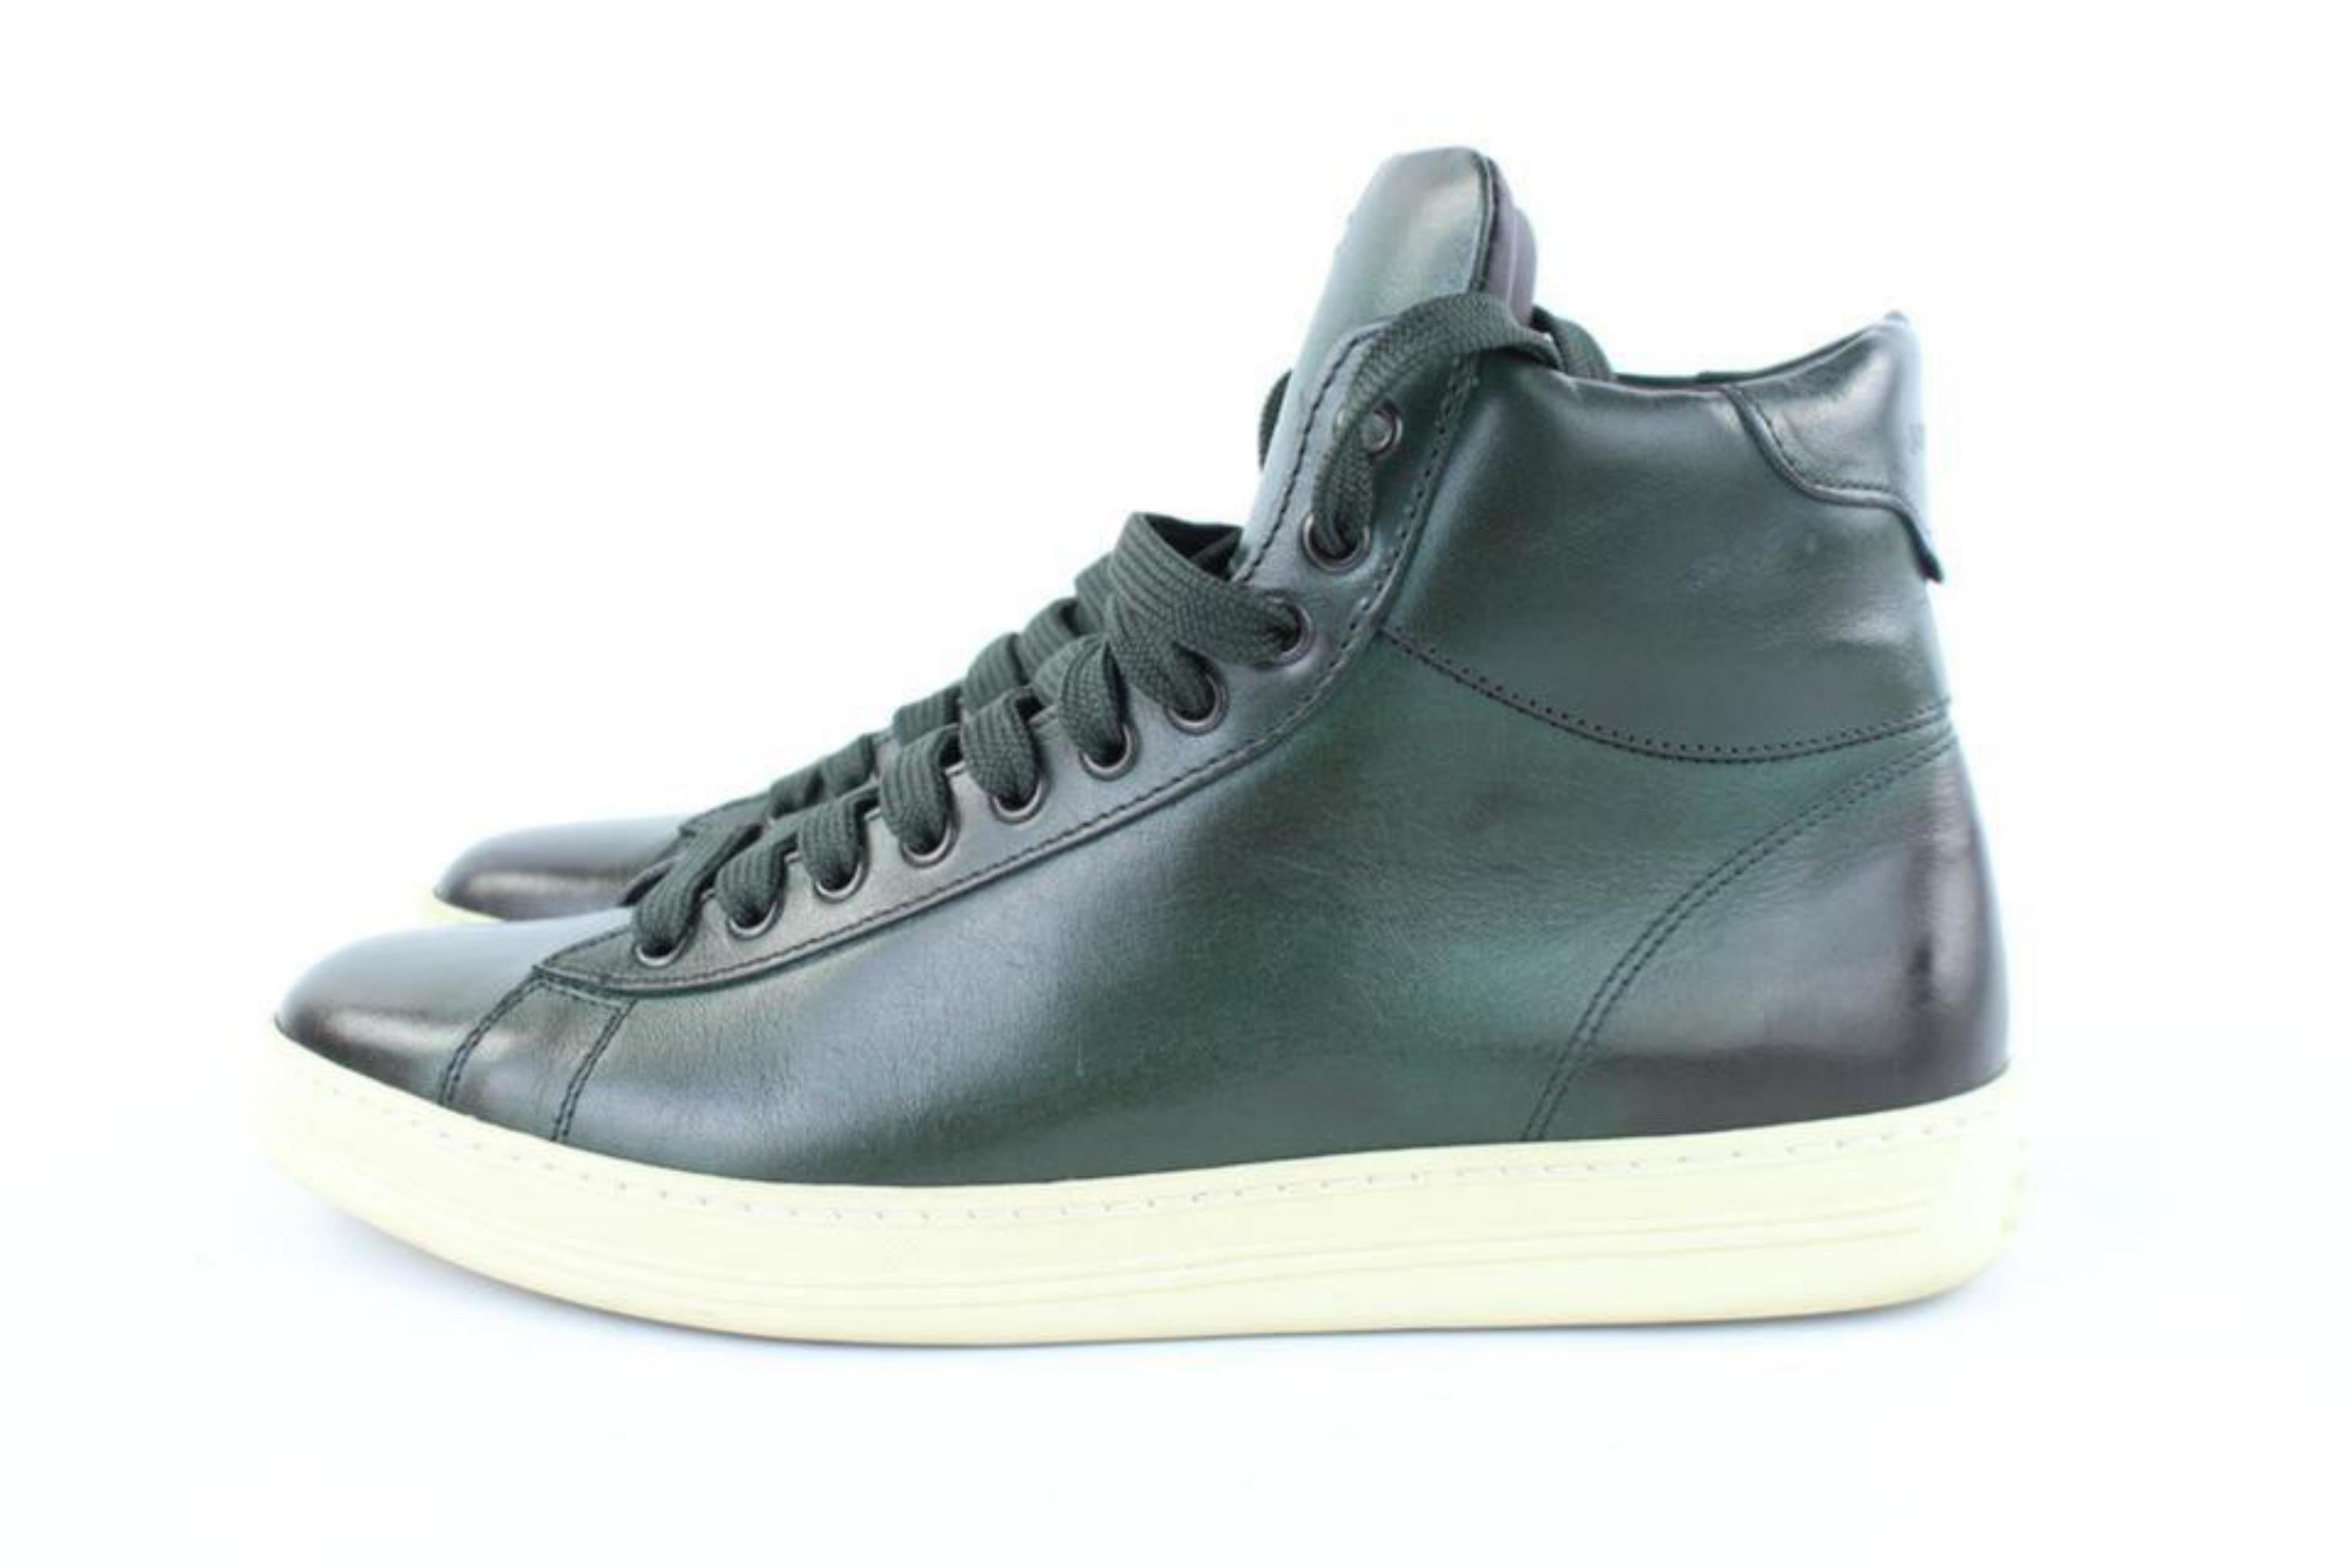 Tom Ford Green Russel Leather High Top Sneaker 2mj1020 Sneakers Boots/Booties For Sale 3